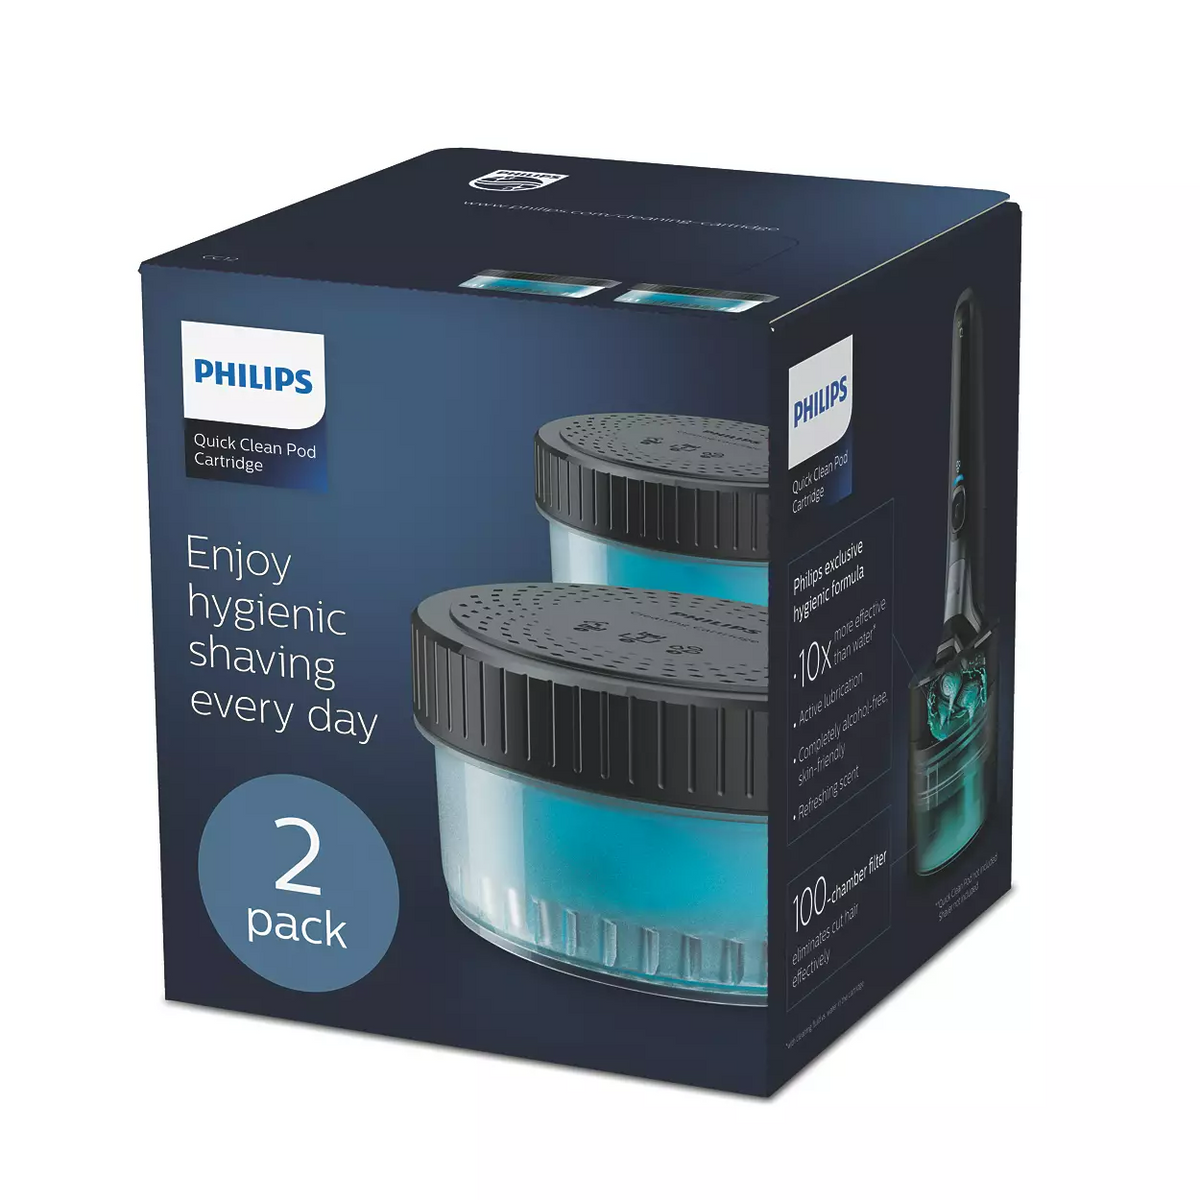 Buy Philips Quick Clean Pod Shaver Cartridges - 3 Pack